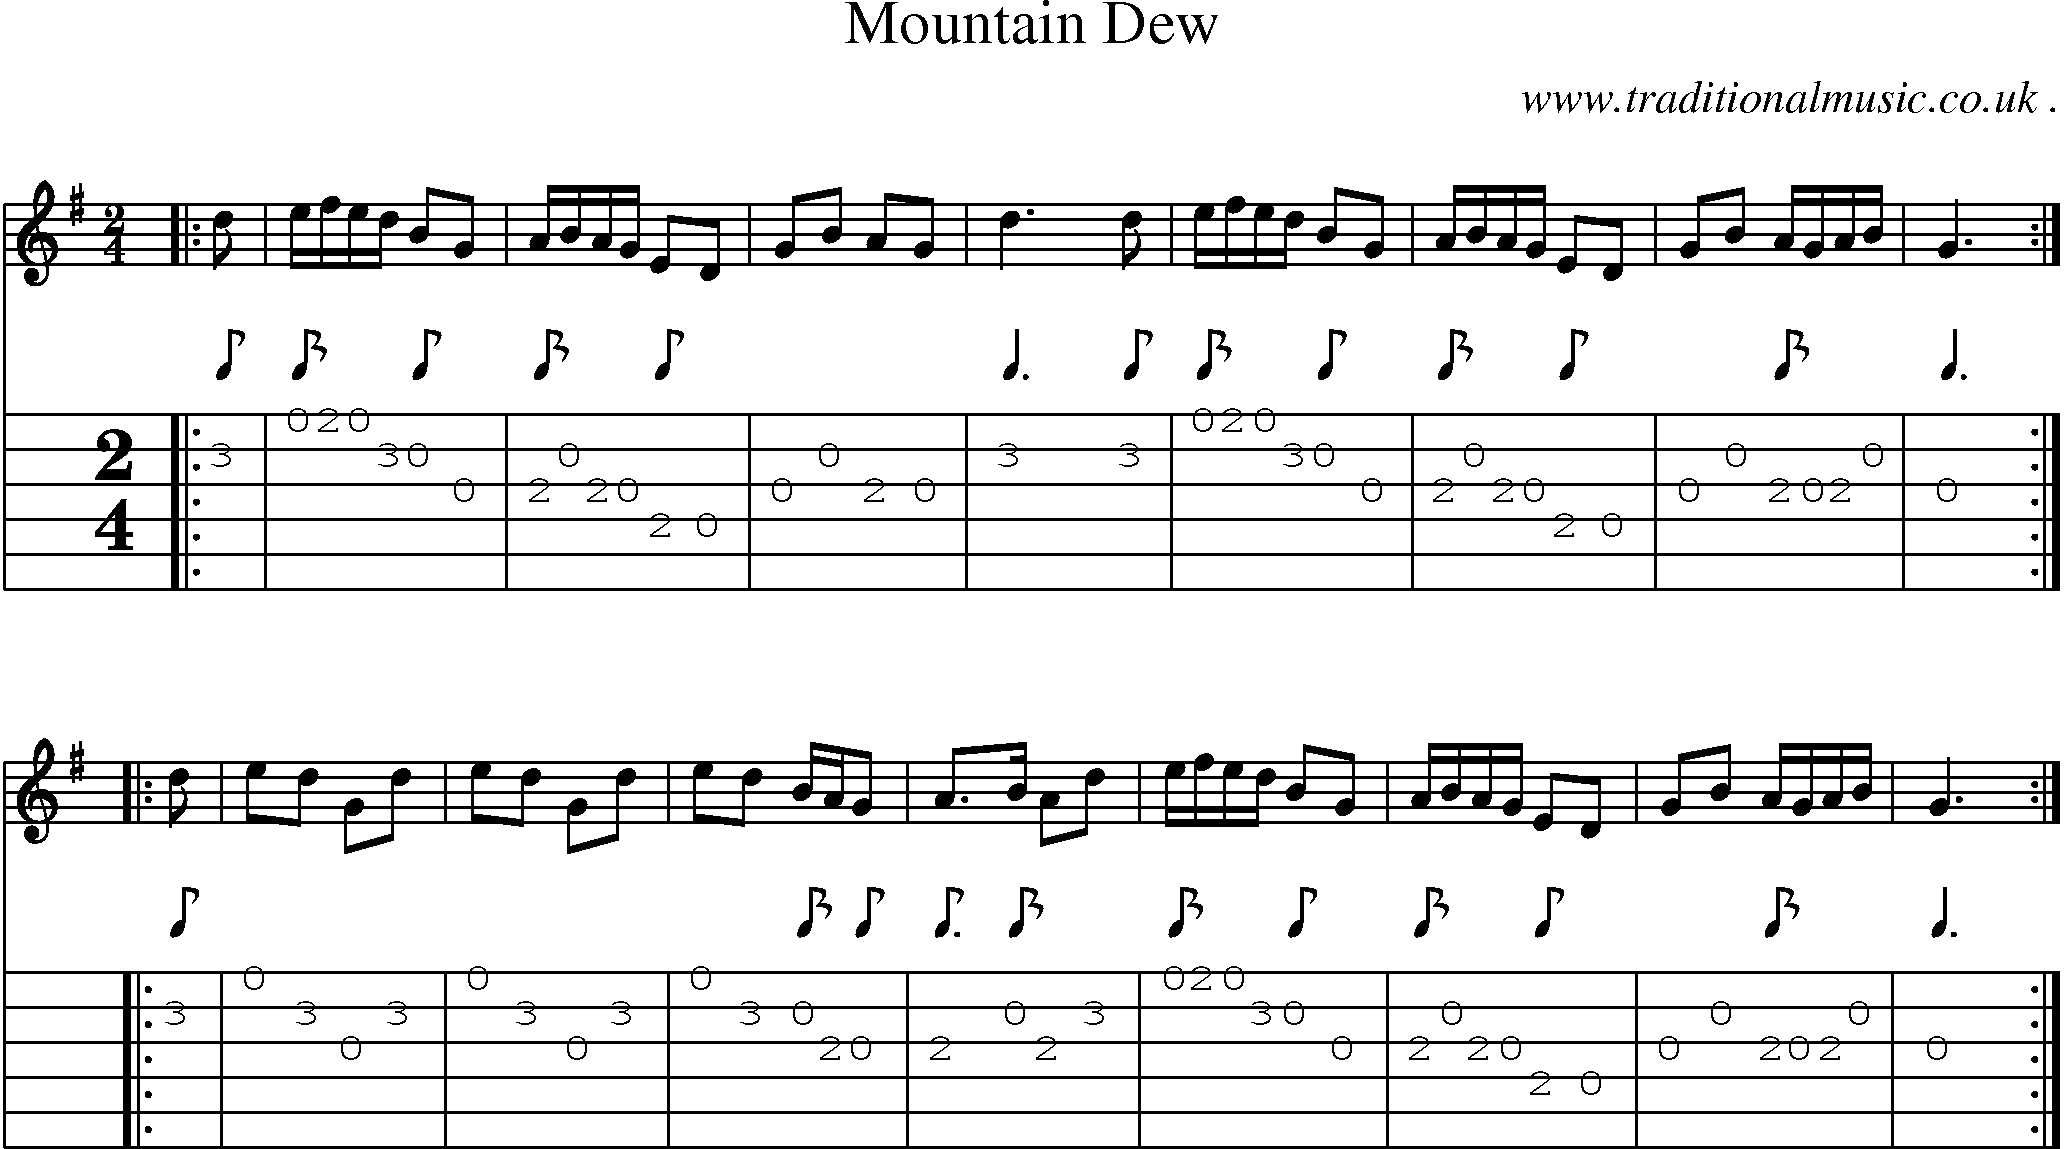 Music Score and Guitar Tabs for Mountain Dew